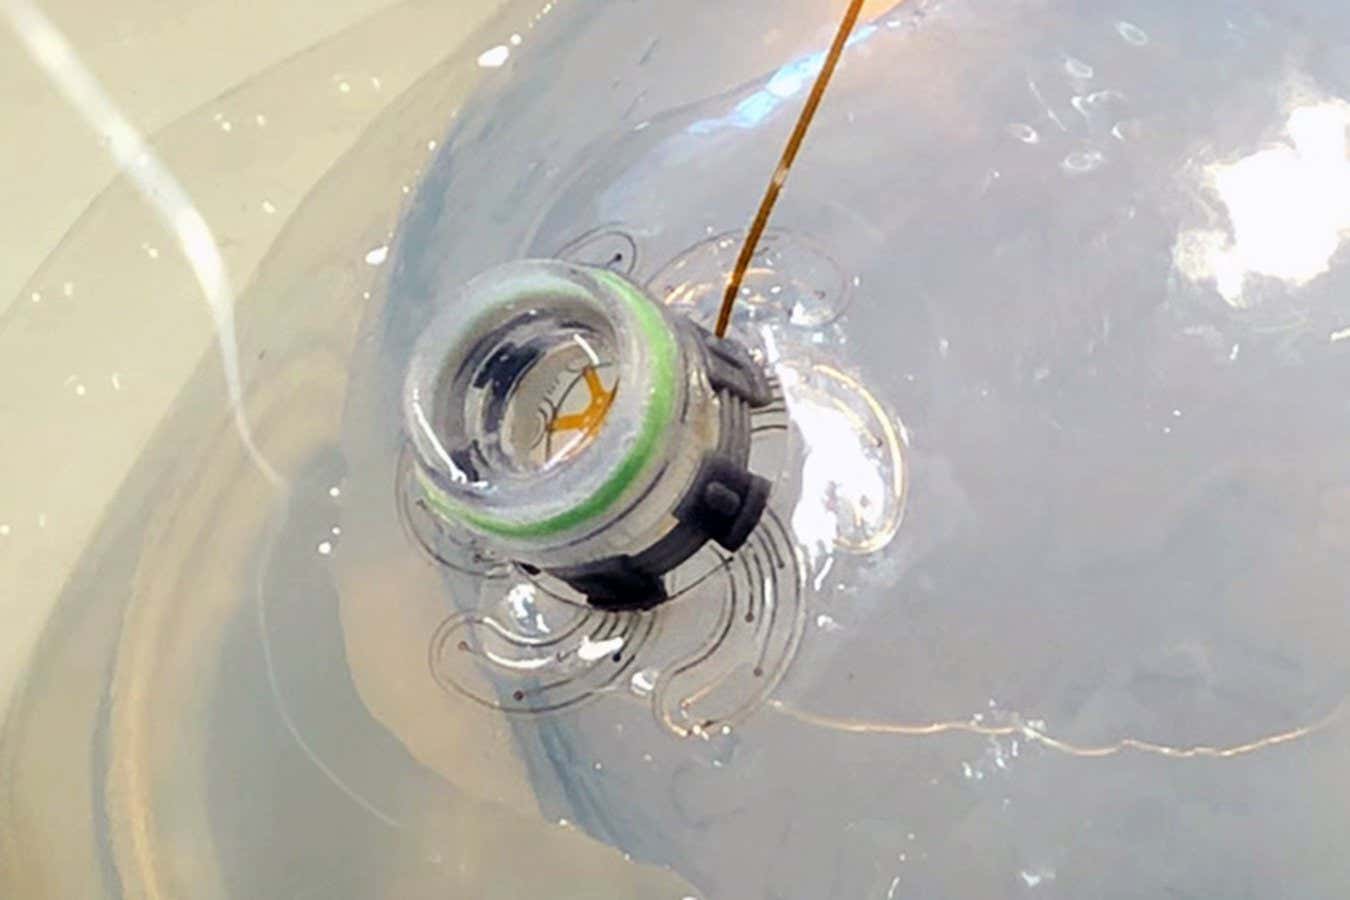 Robot injected into the skull deploys its tentacles to monitor the brain

